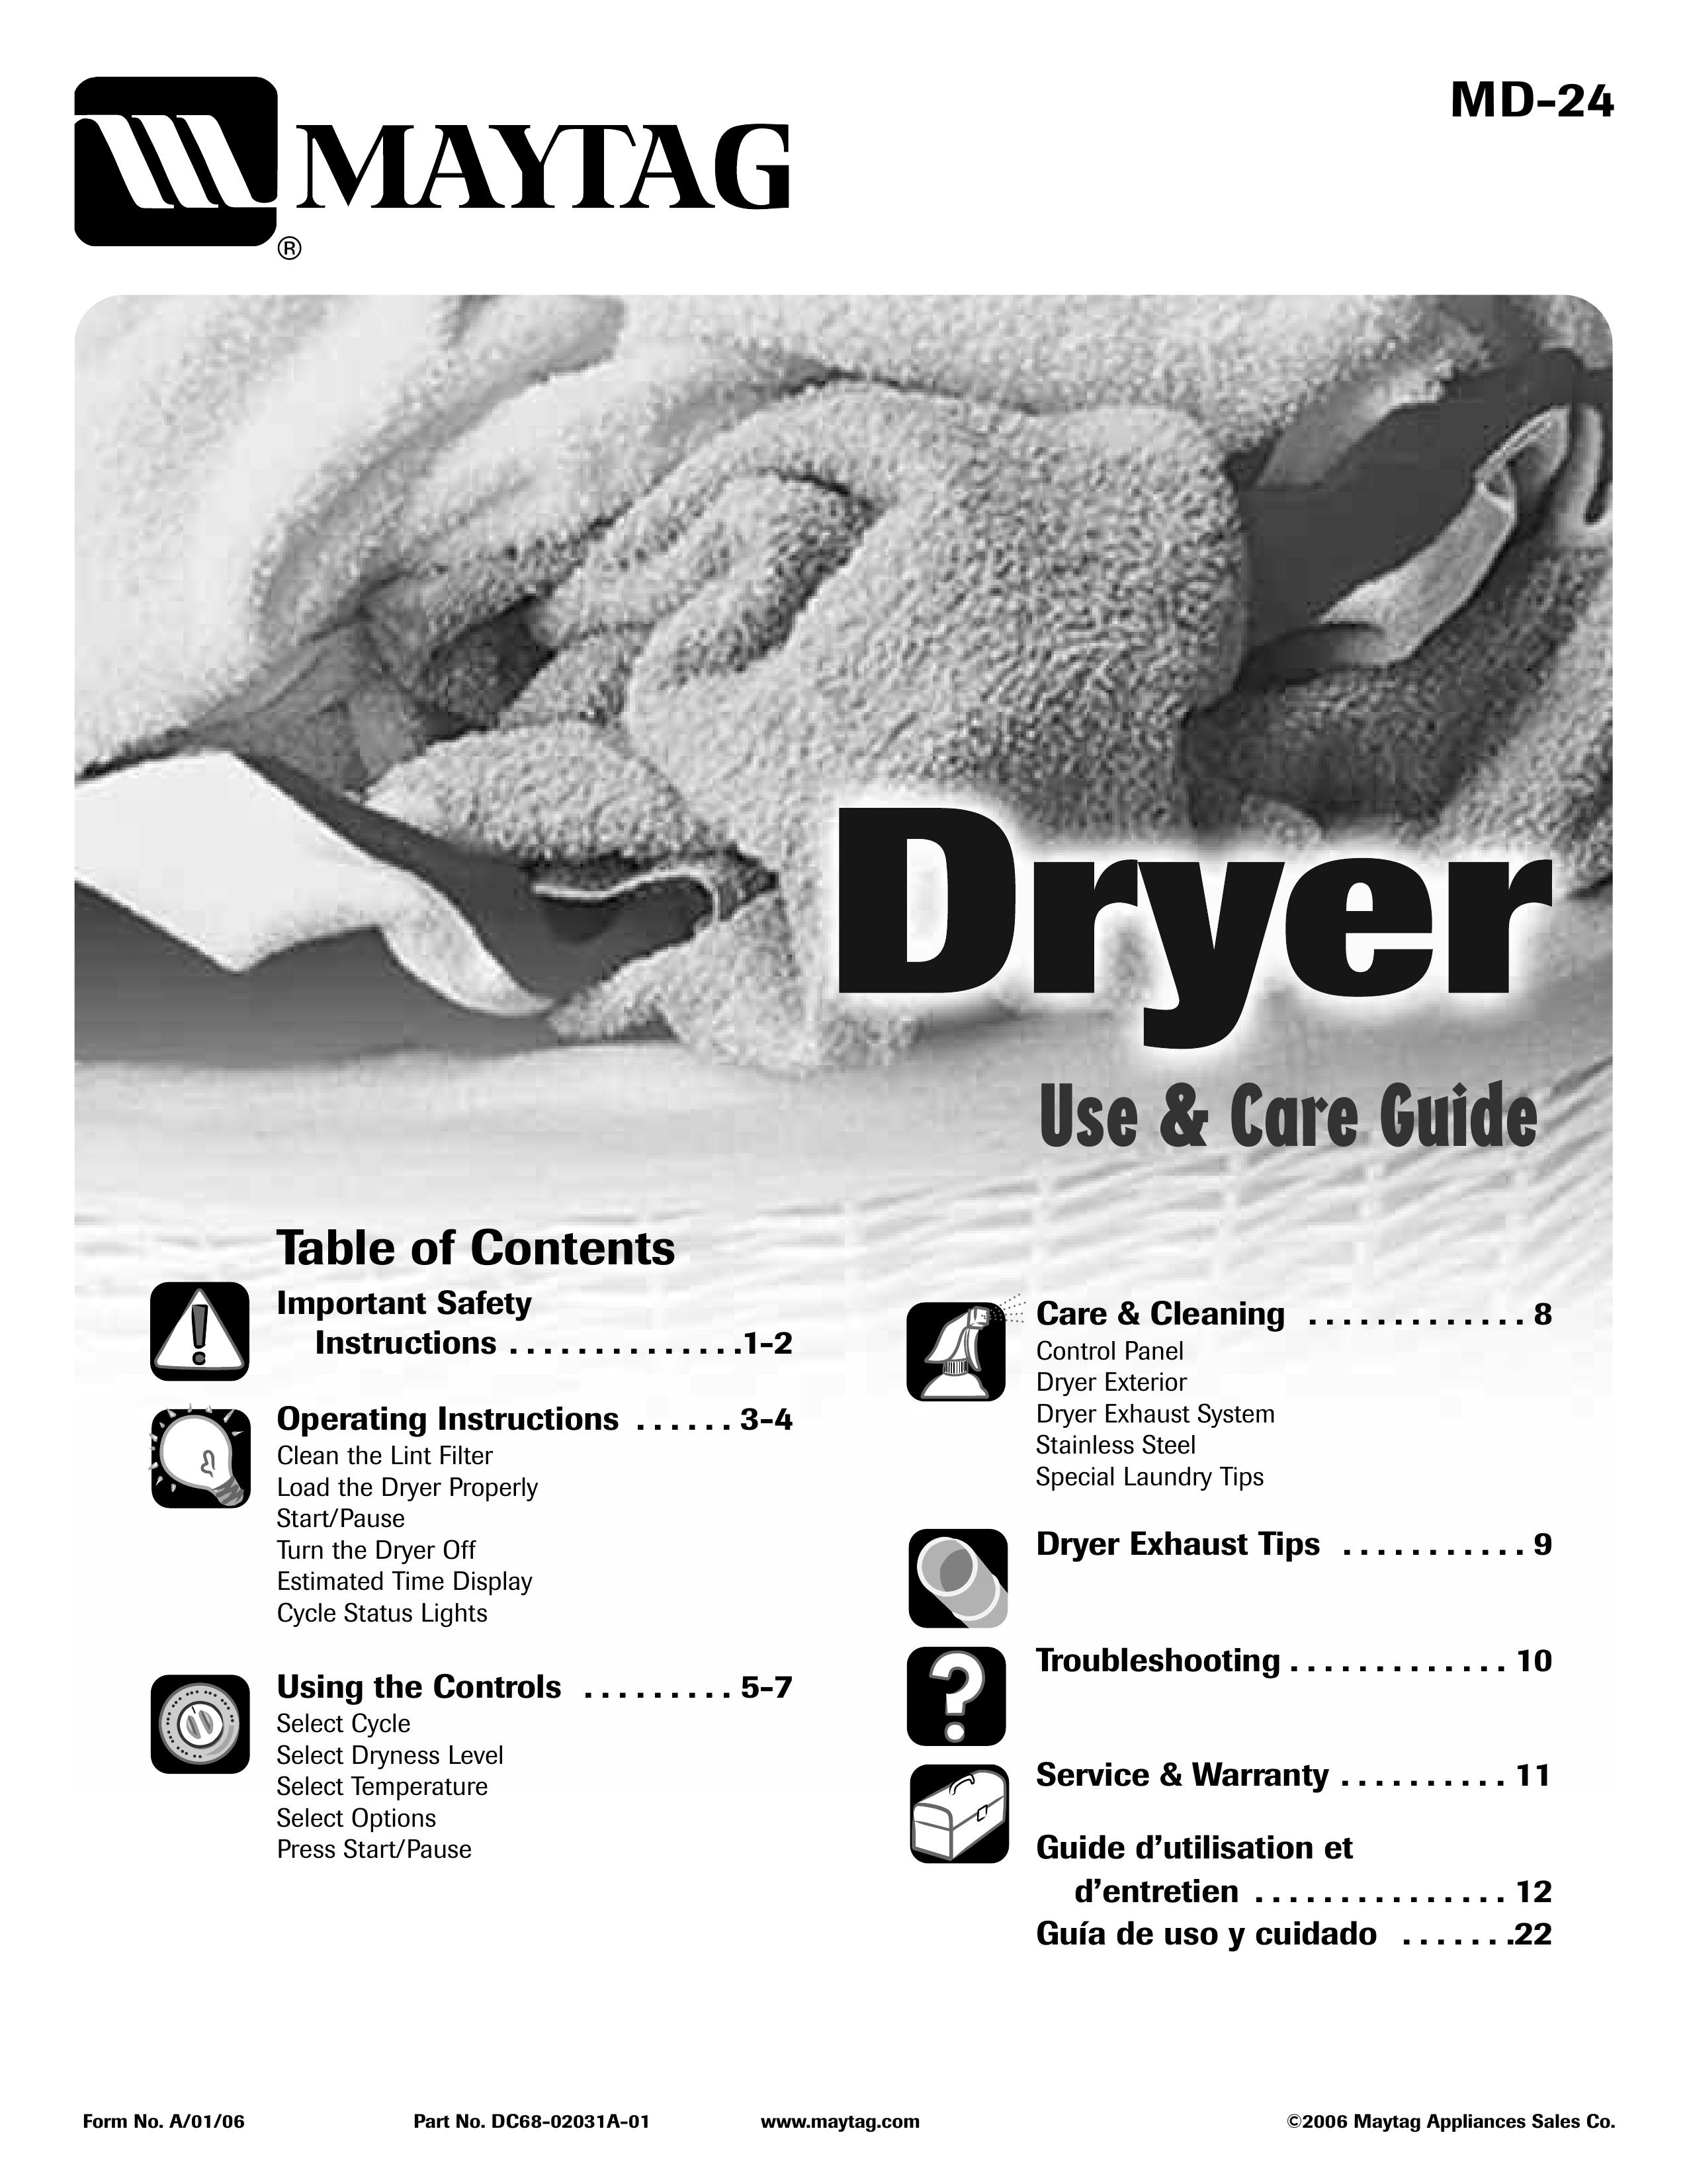 Maytag MD-24 Clothes Dryer User Manual